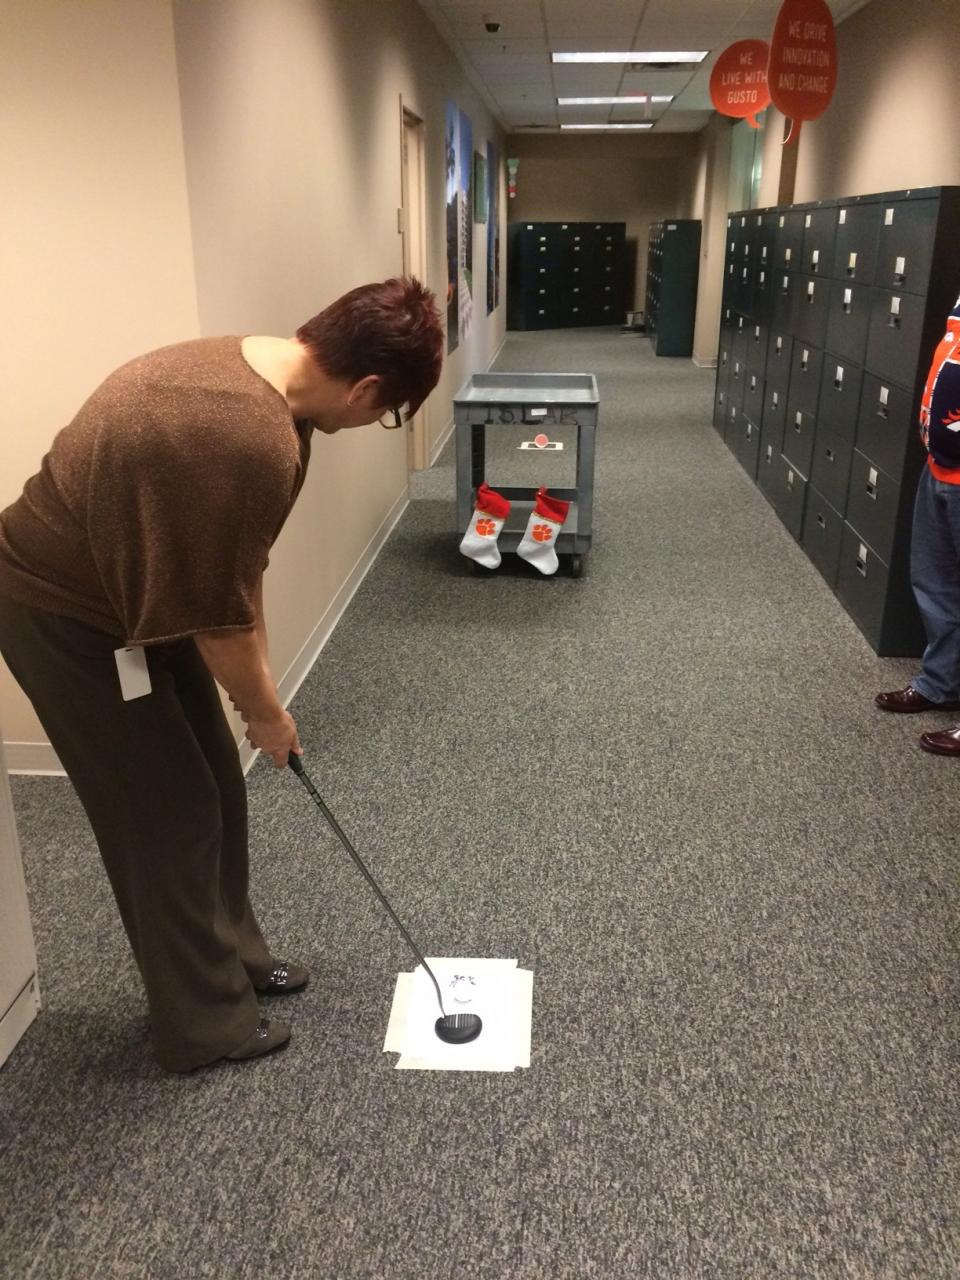 We had a little fun golfing in our Greenville, NC office.